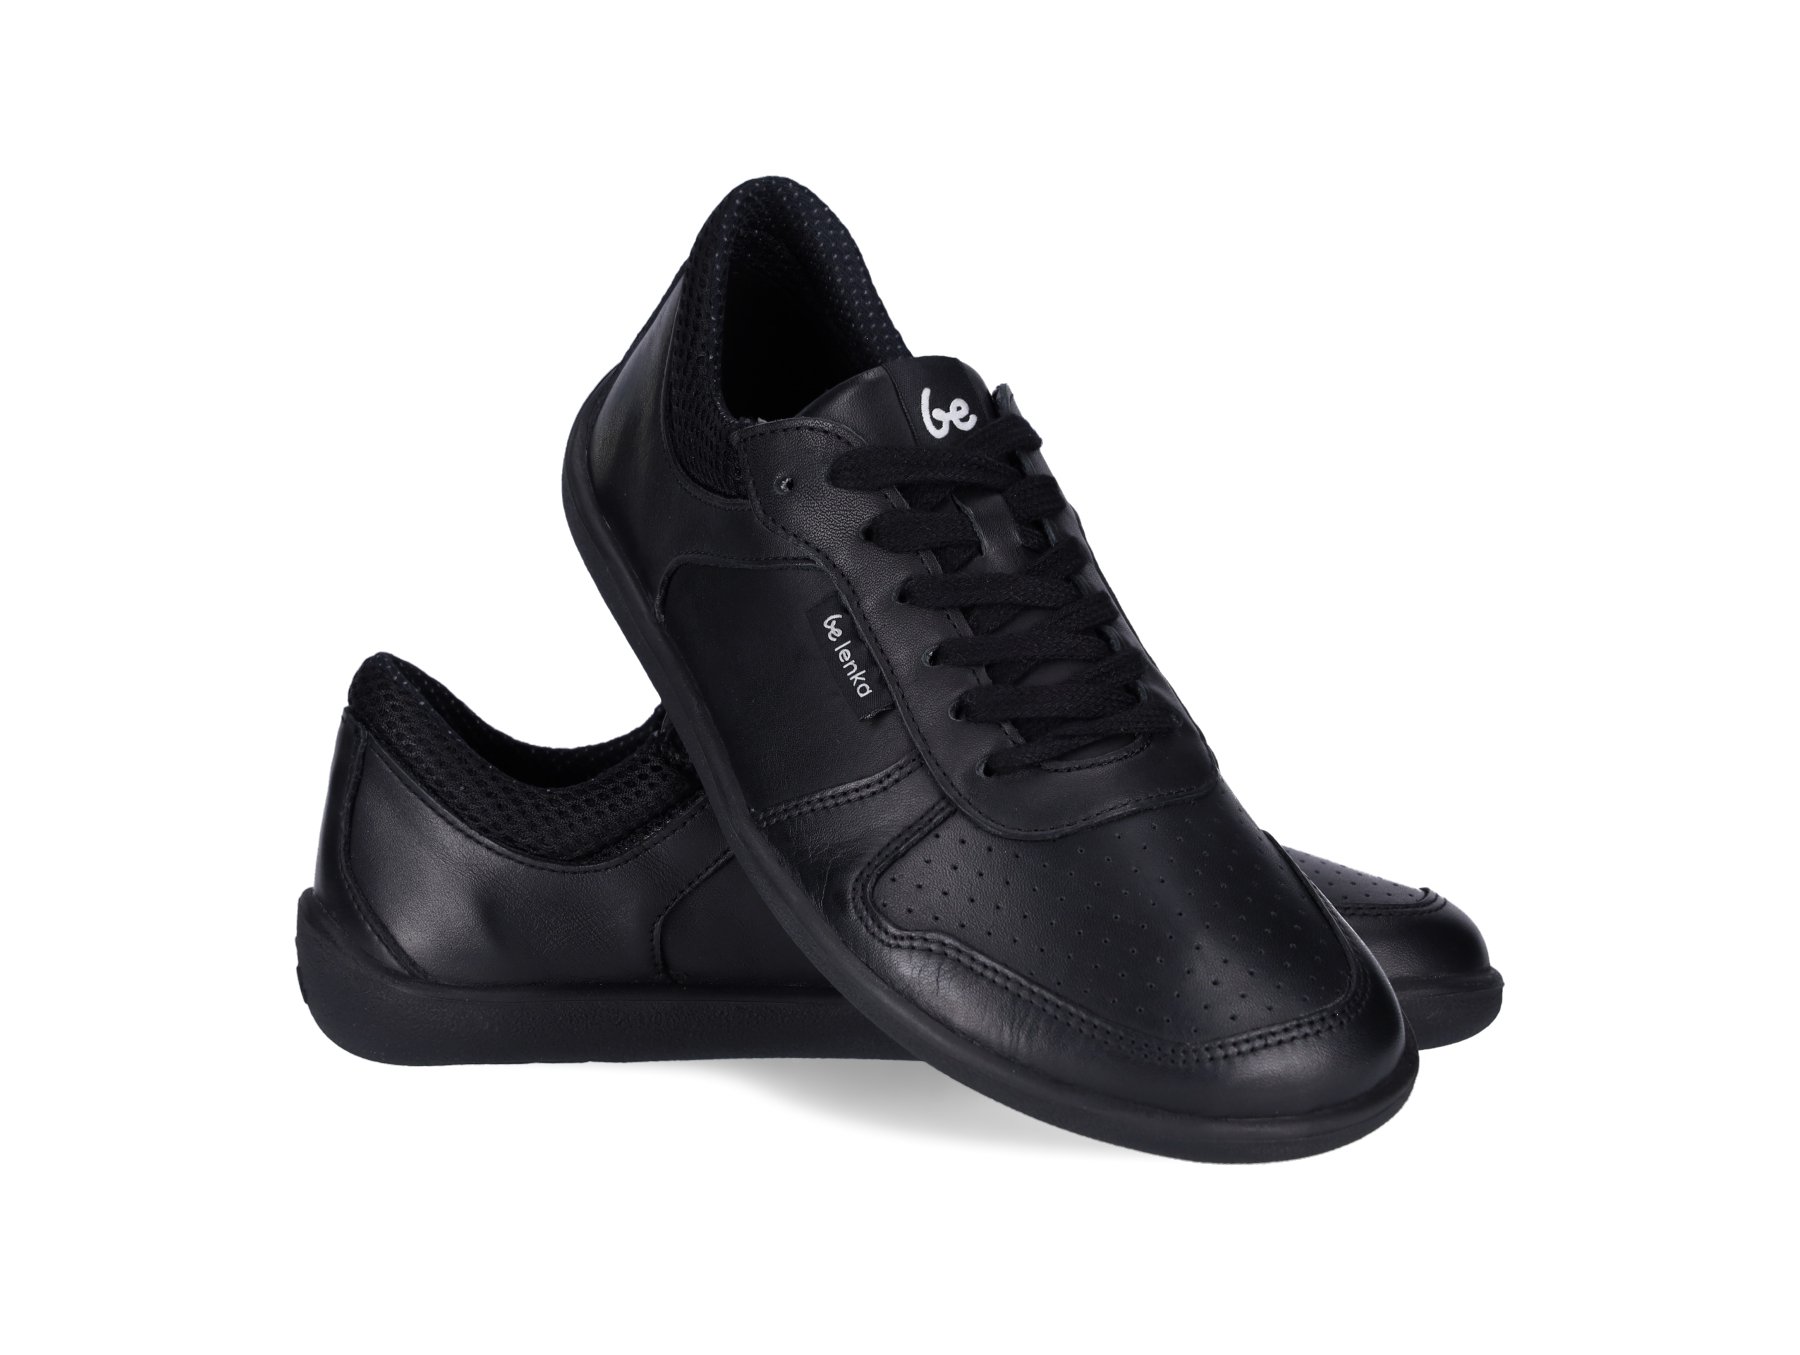 LORENZO LEATHER/GUM SOLE SNEAKERS IN BLACK | Poor Little Rich Boy Clothing